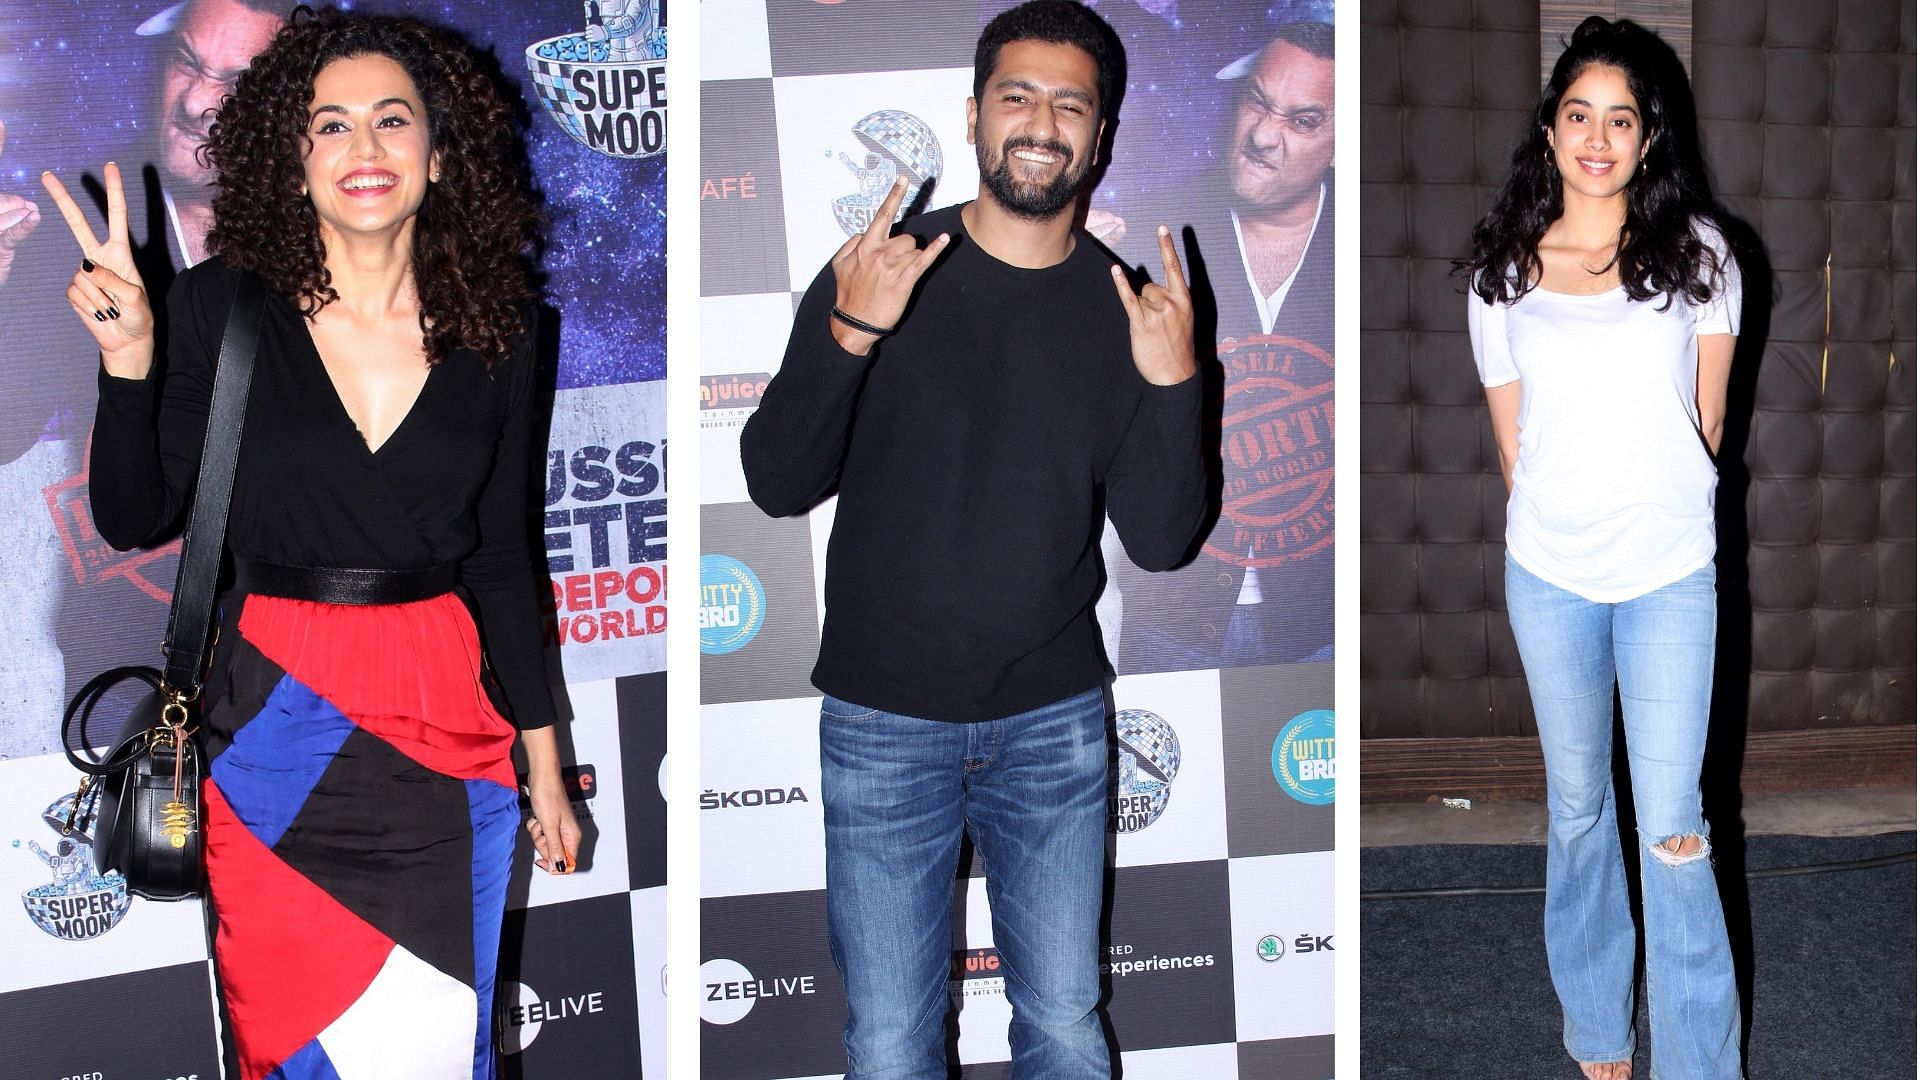 Taapsee Pannu, Vicky Kaushal and Janhvi Kapoor at the show.